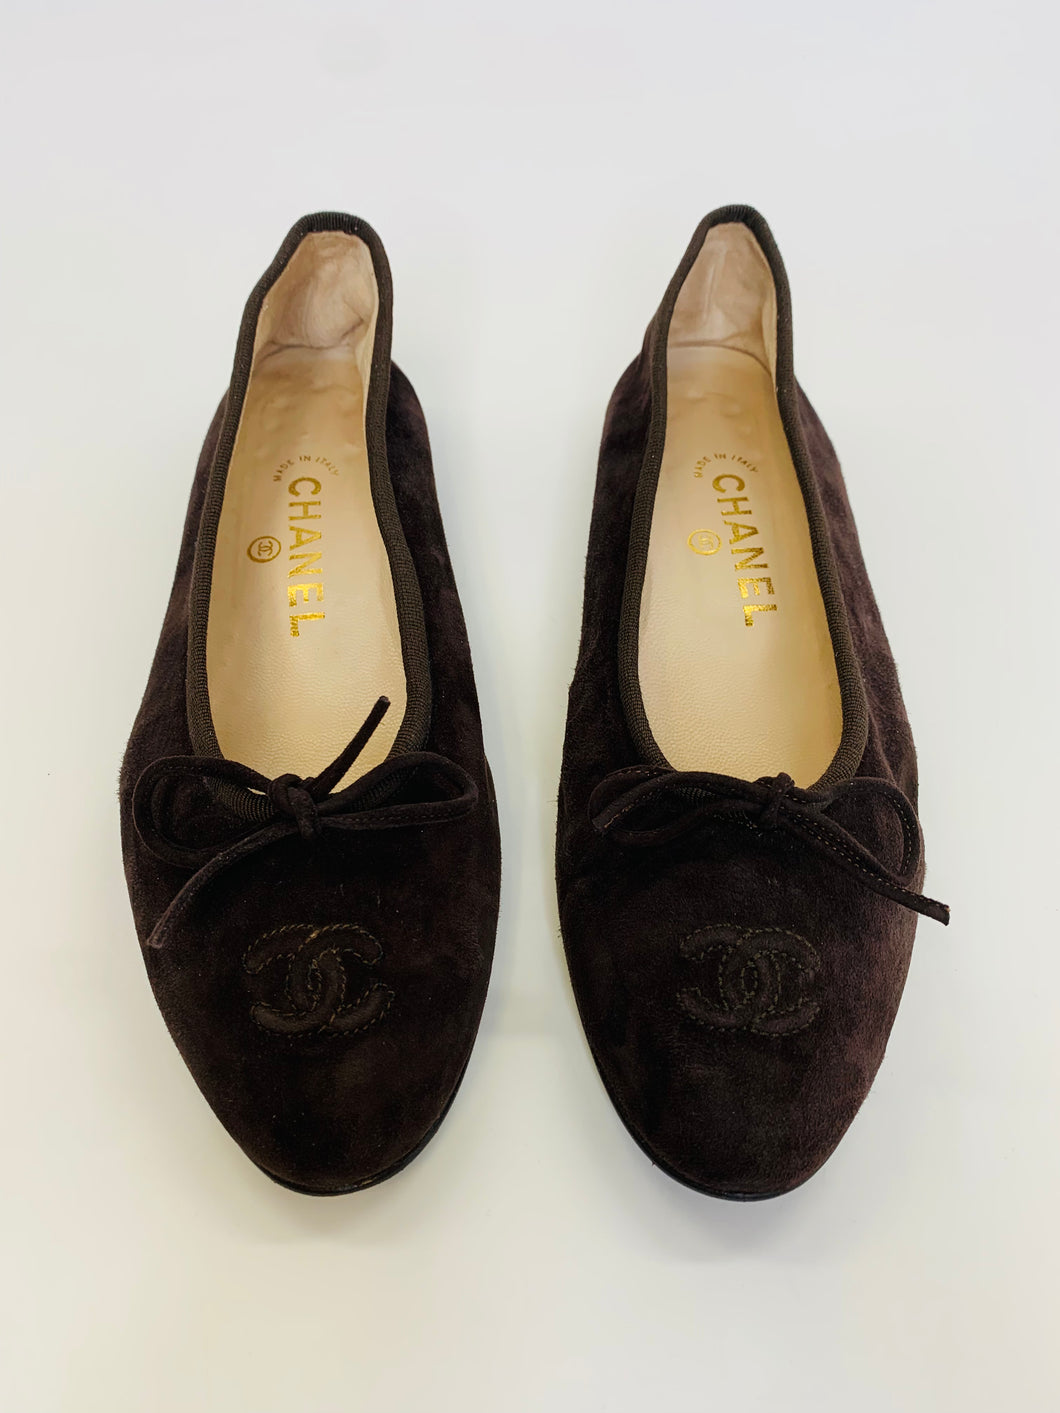 CHANEL Brown Suede Ballerina Flats Size 39